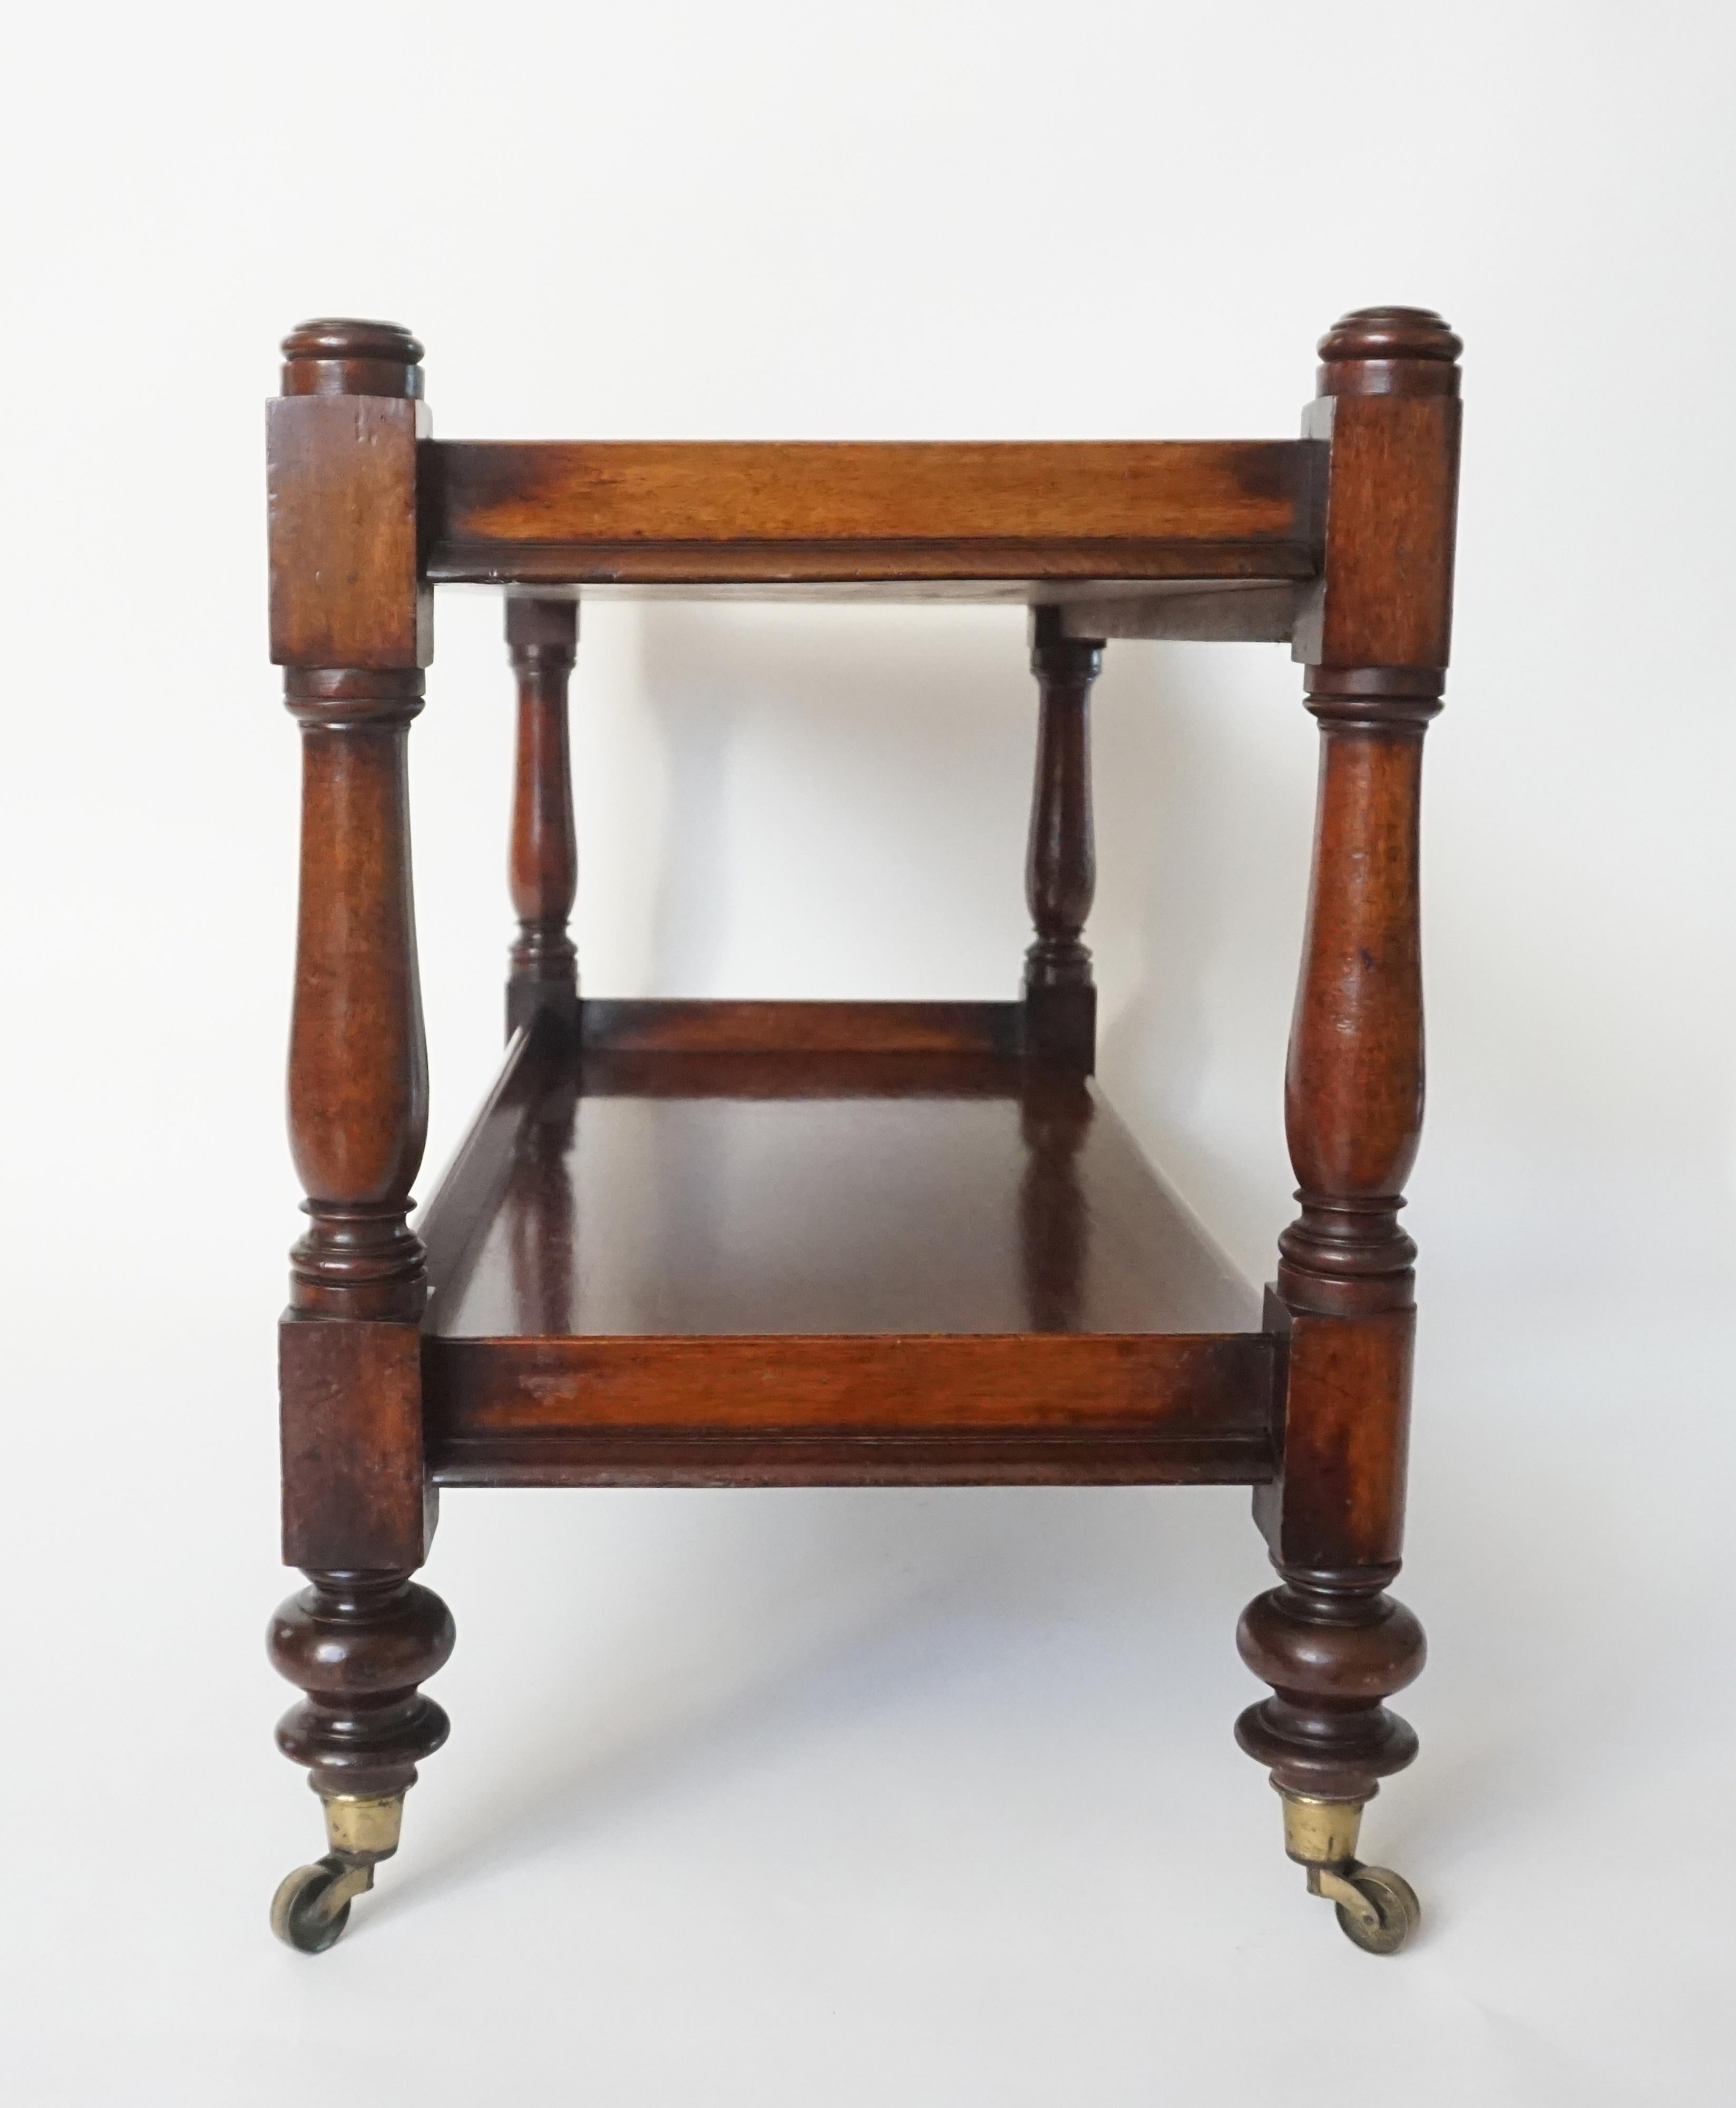 William IV English late Regency period mahogany étagère or trolley of rectangular two-tier form having turned corner stiles on original brass casters. A beautiful piece with many uses; wonderful as a coffee table or television stand to name a